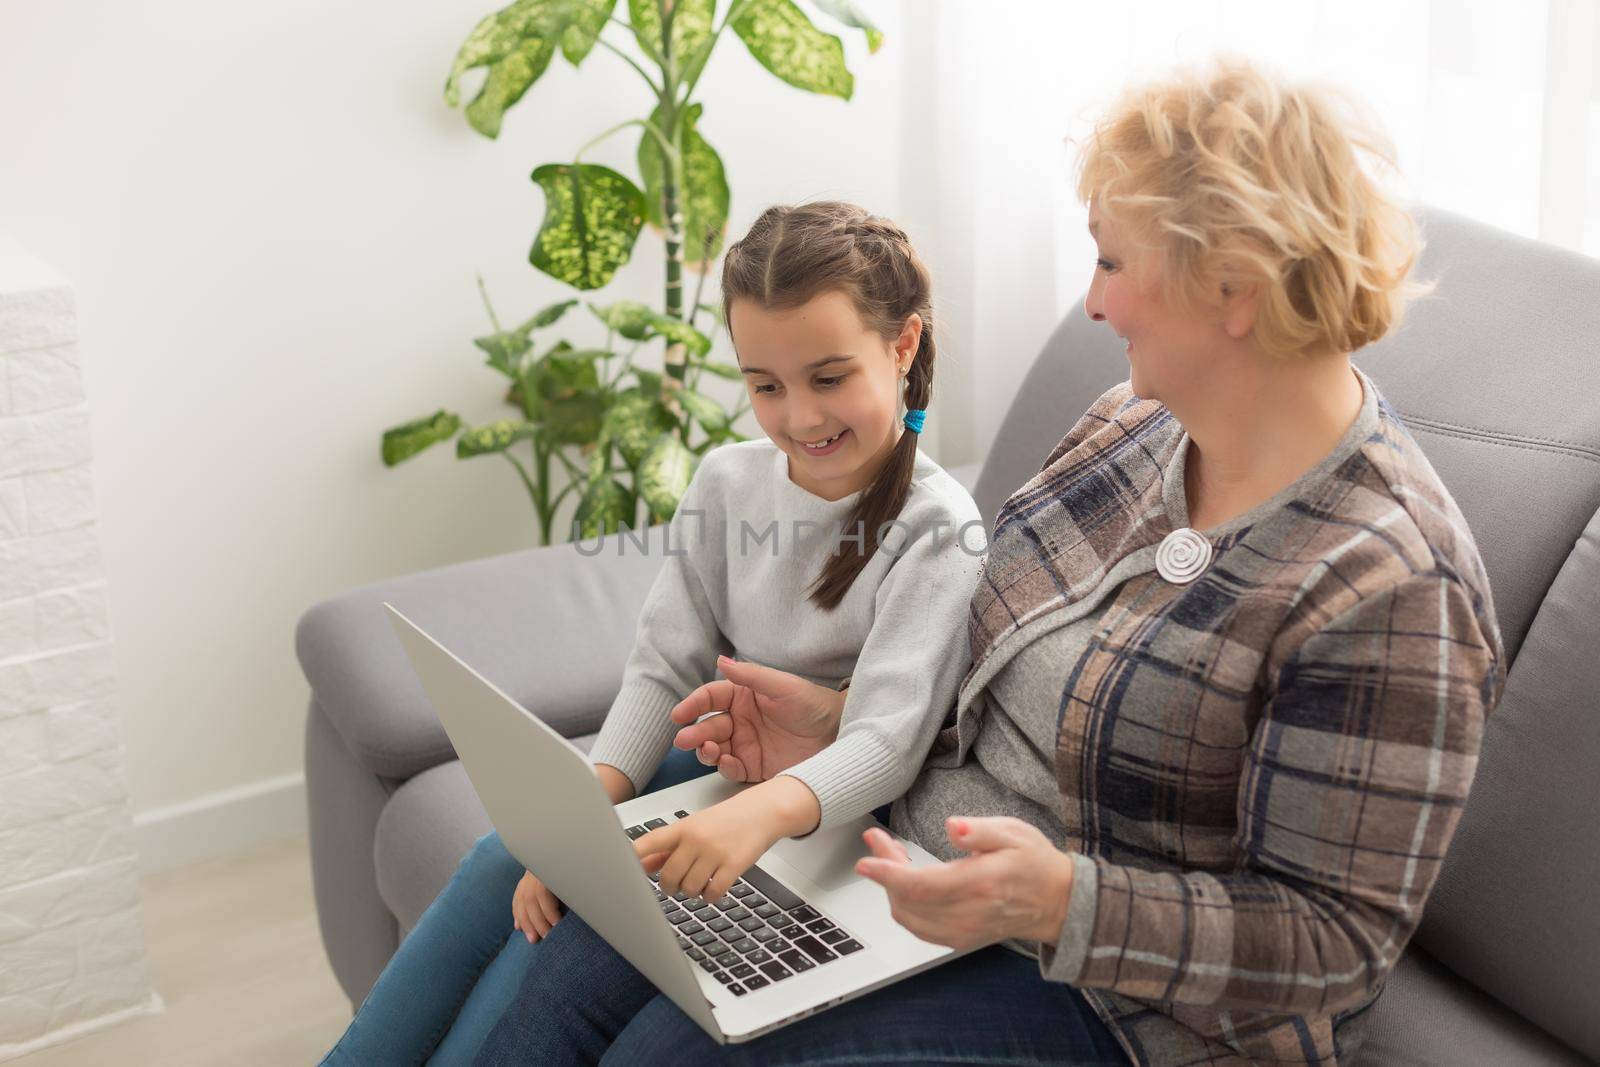 Smart little girl grandchild sit on couch shopping online with excited senior grandmother, teen granddaughter and smiling granny buy on internet browsing laptop relaxing at home together